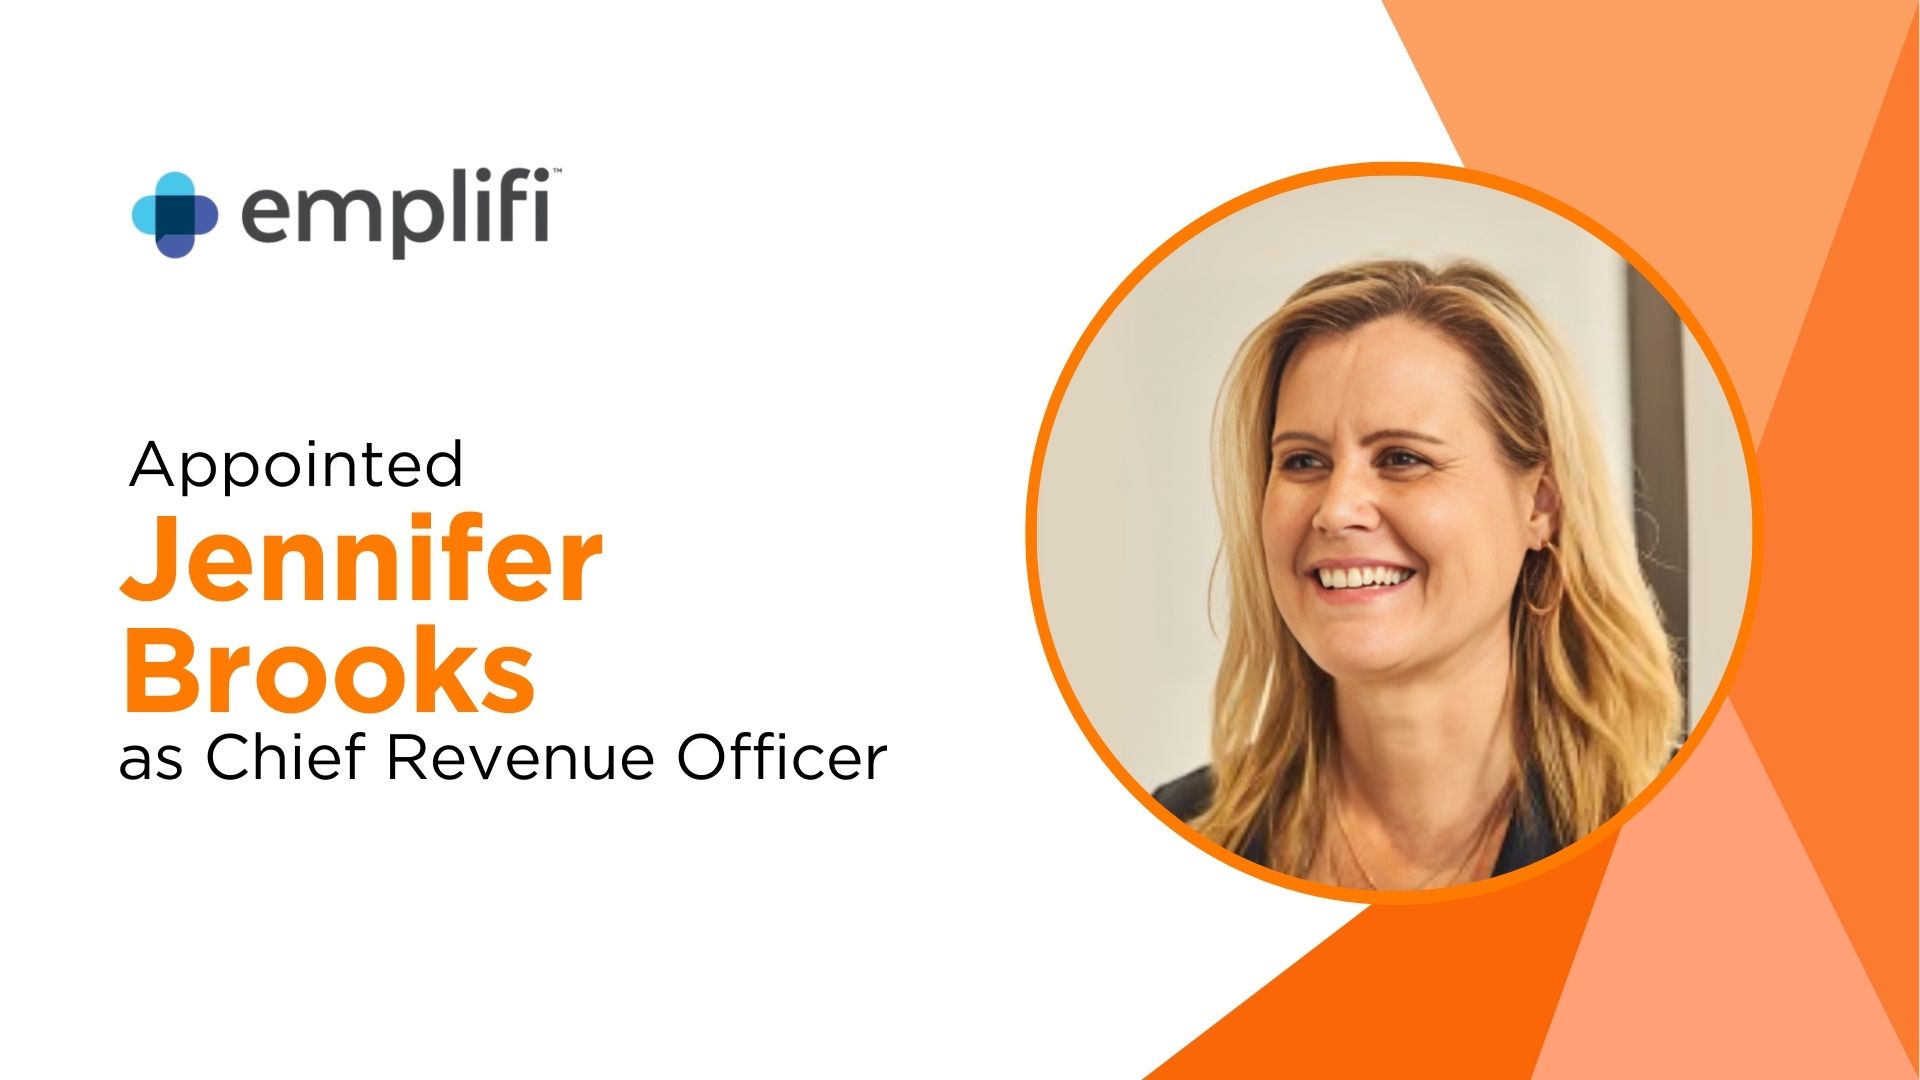 Jennifer Brooks Appointed as Chief Revenue Officer at Emplifi